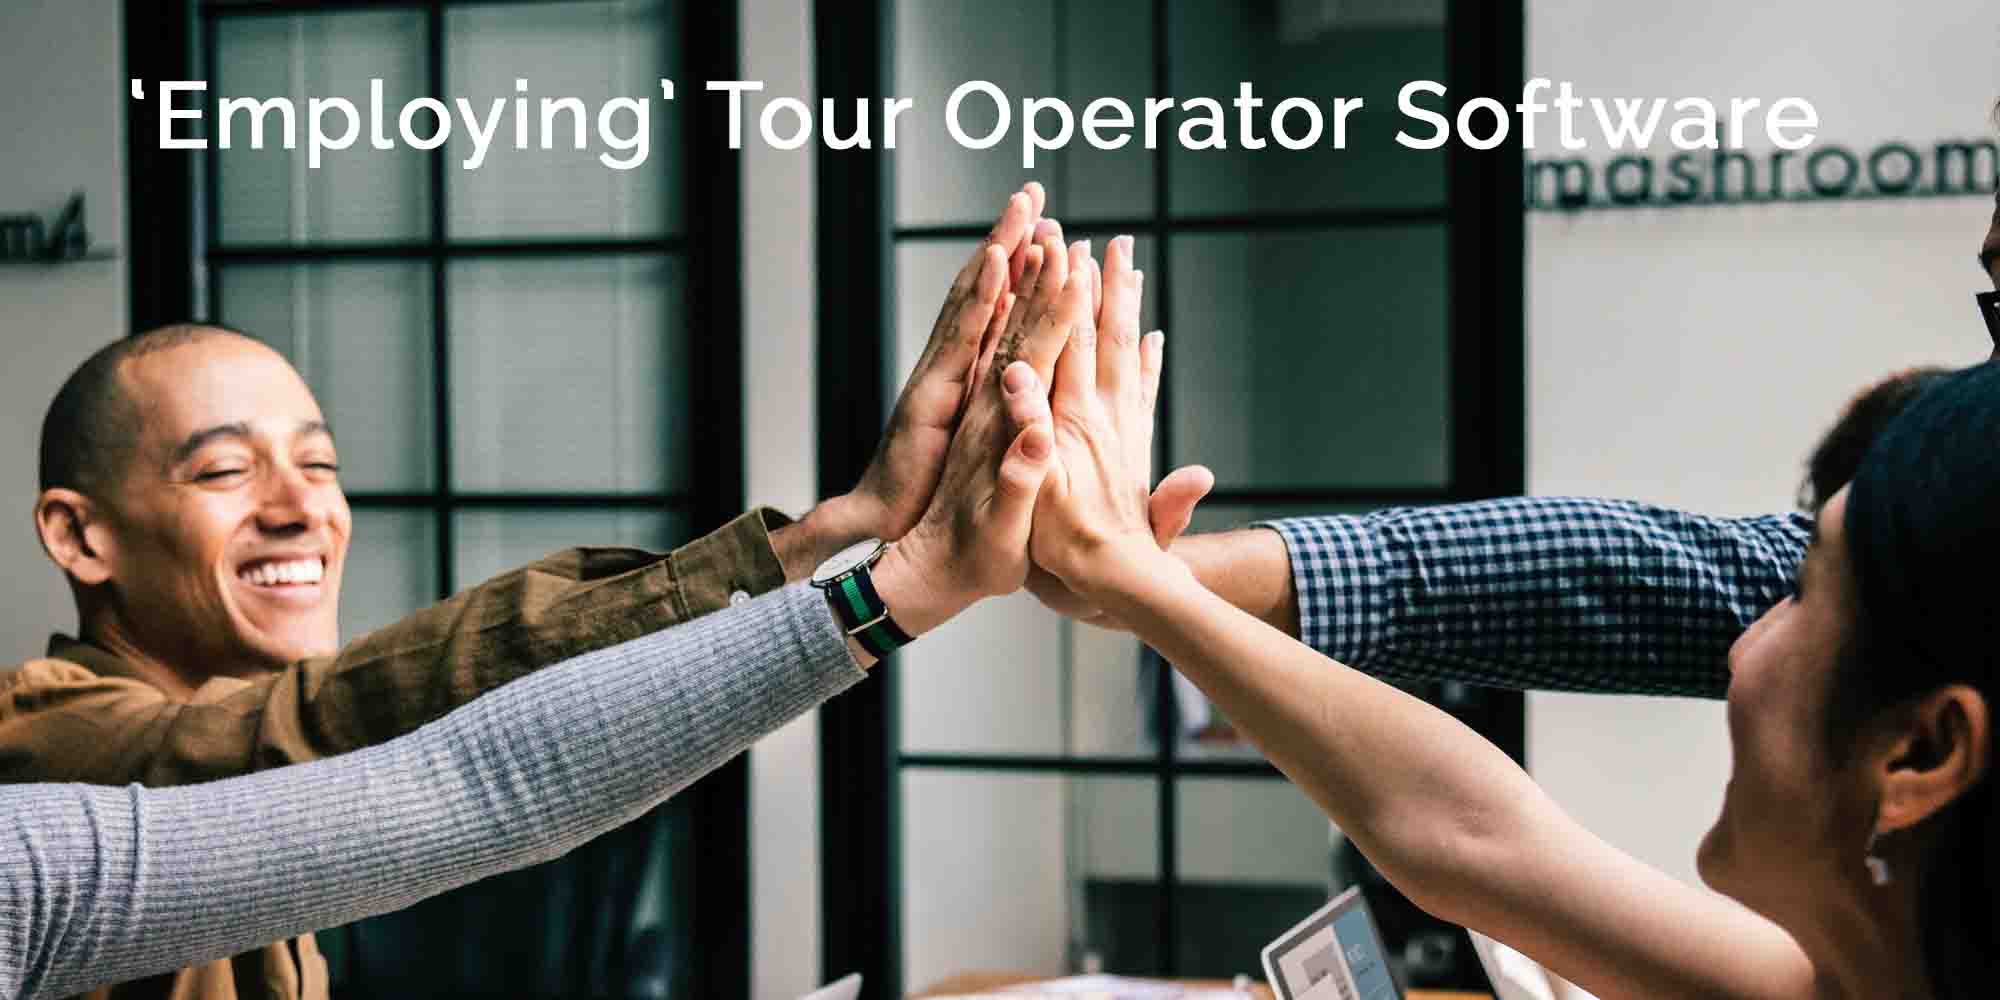 How ‘employing’ tour operator software can increase employee and customer satisfaction